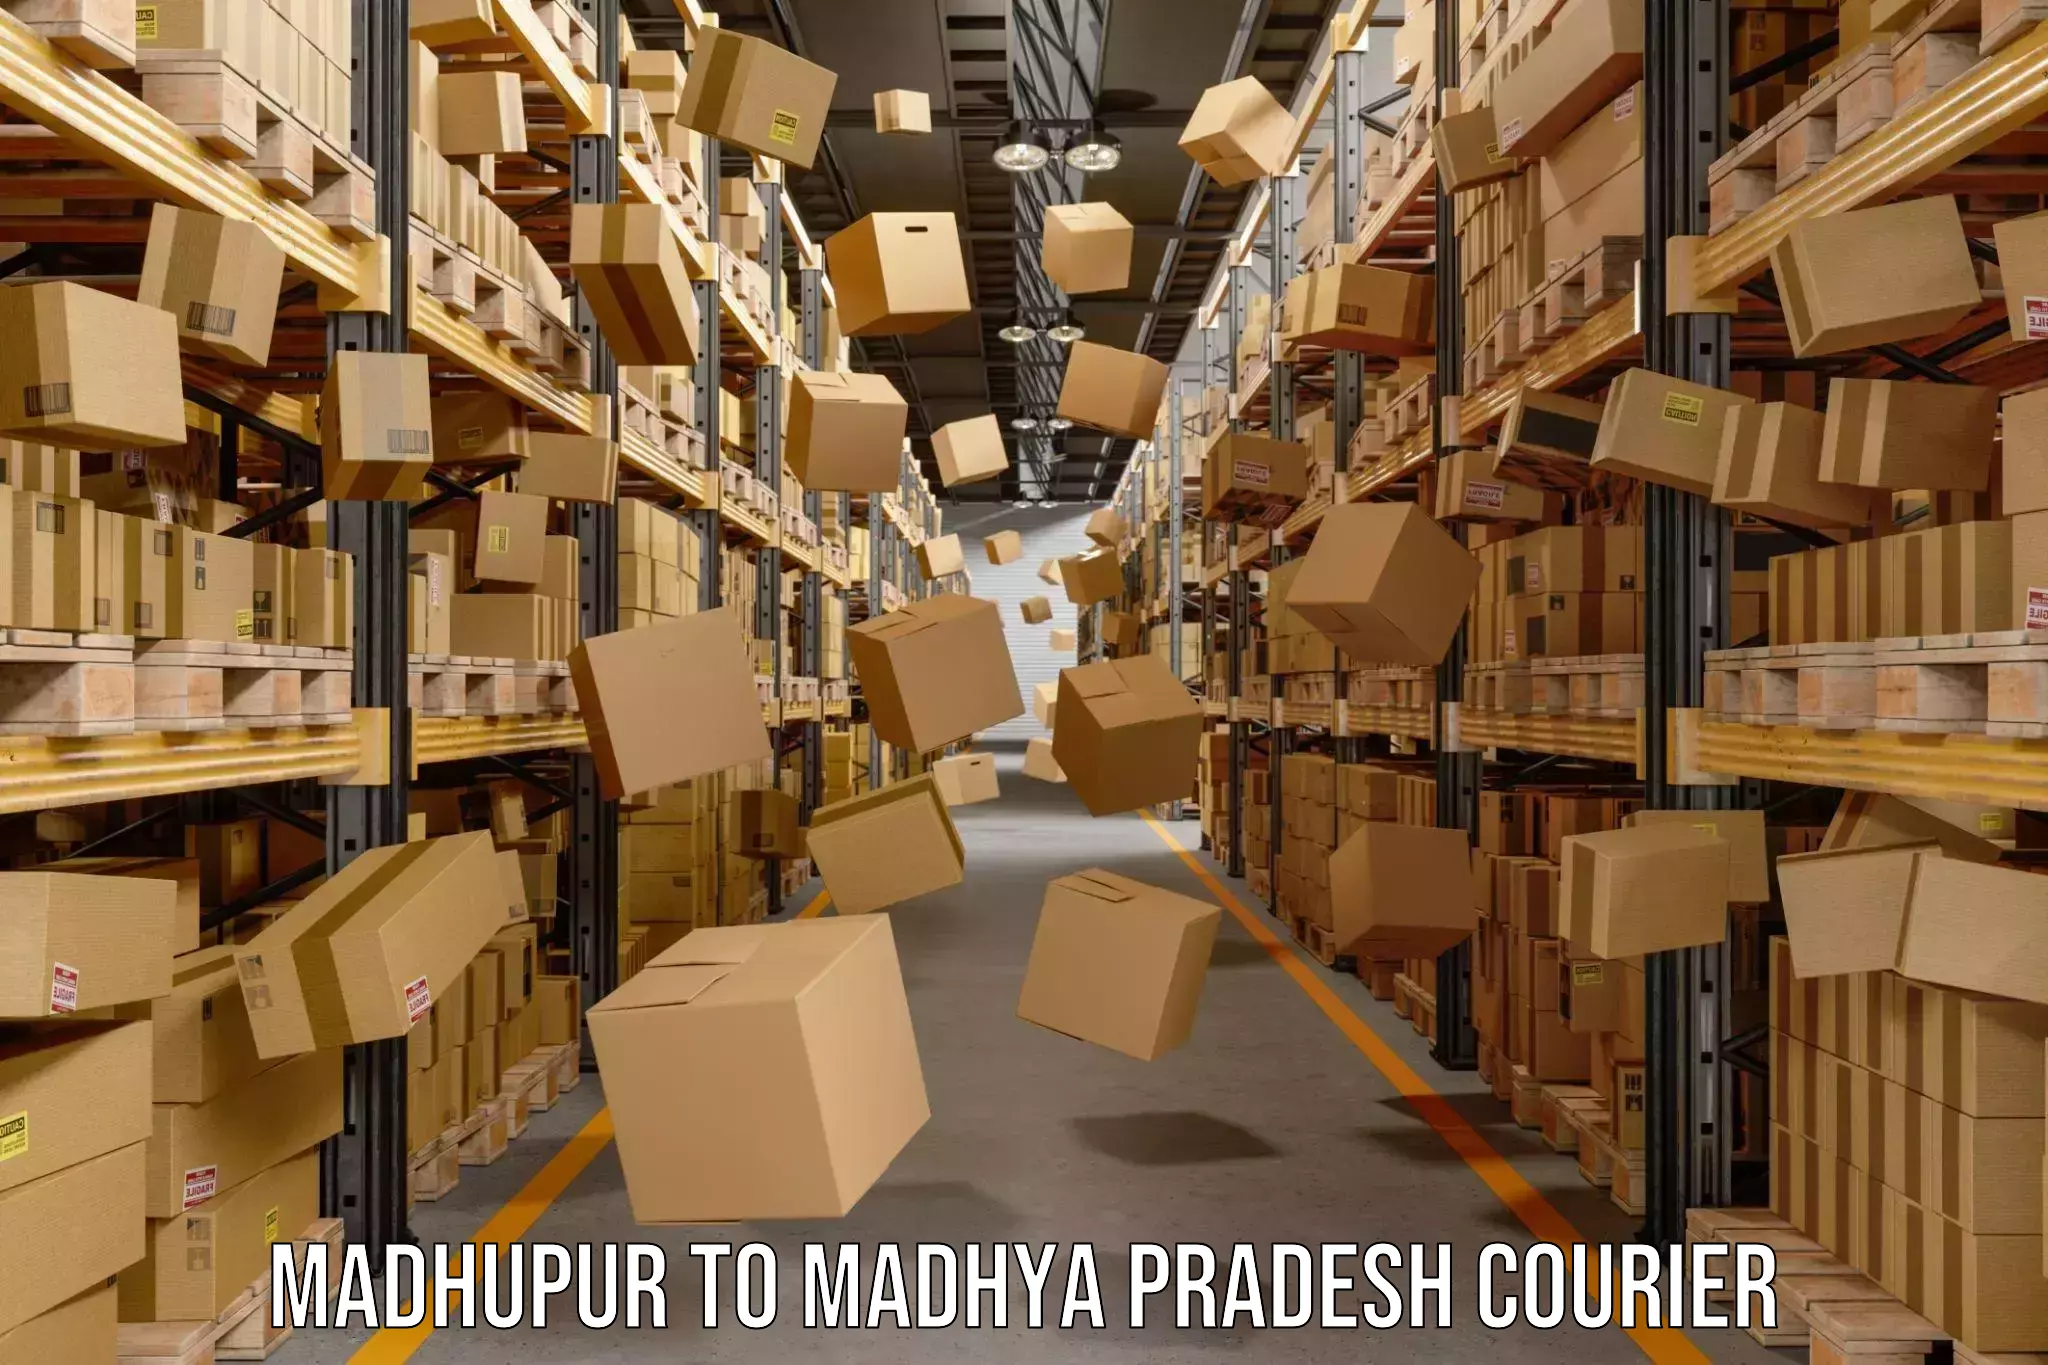 User-friendly delivery service Madhupur to Indore